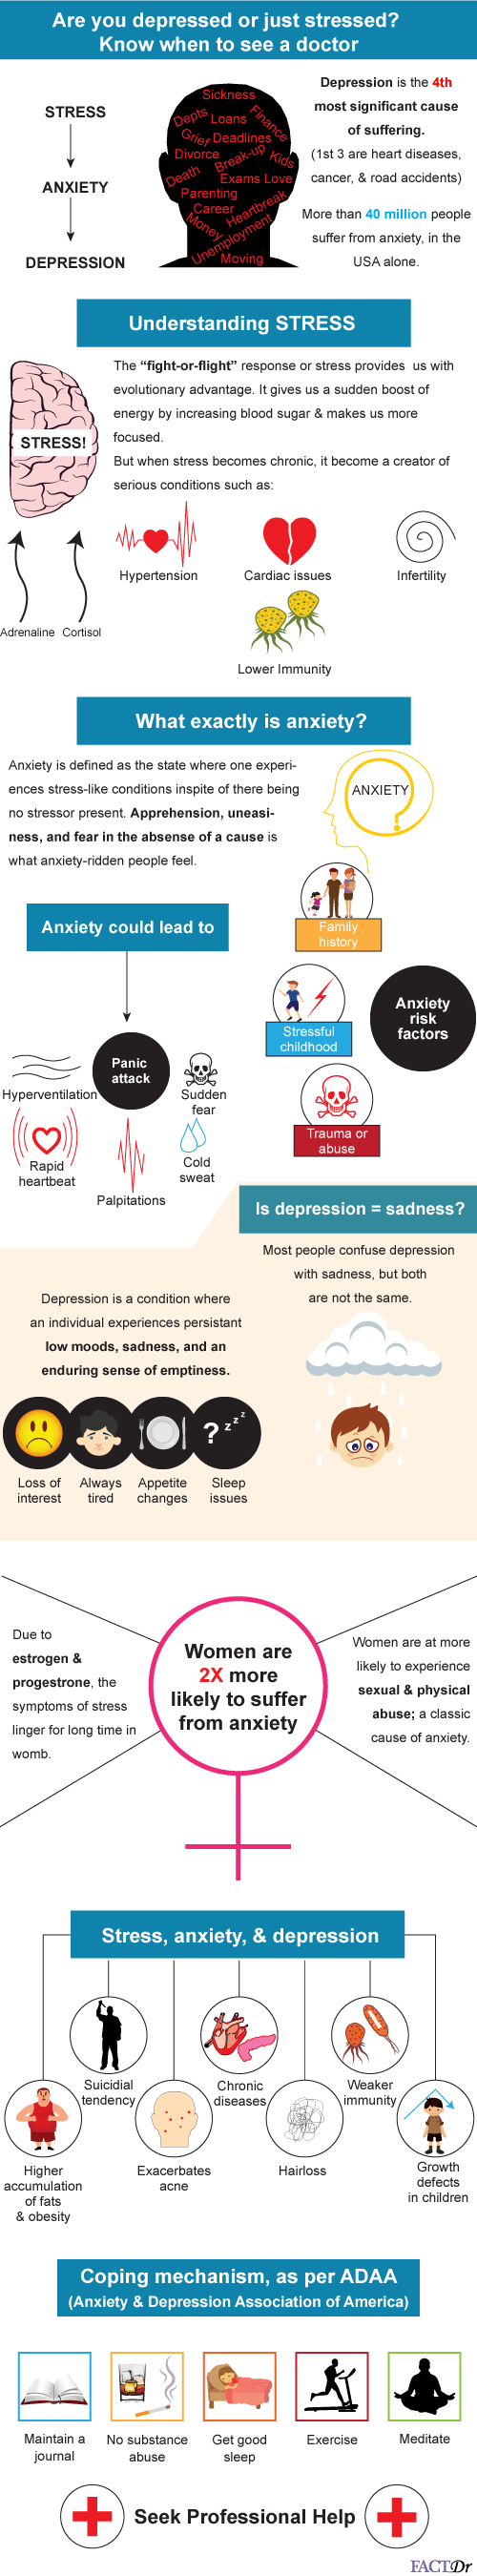 Are you depressed or just stressed? Know when to see a doctor